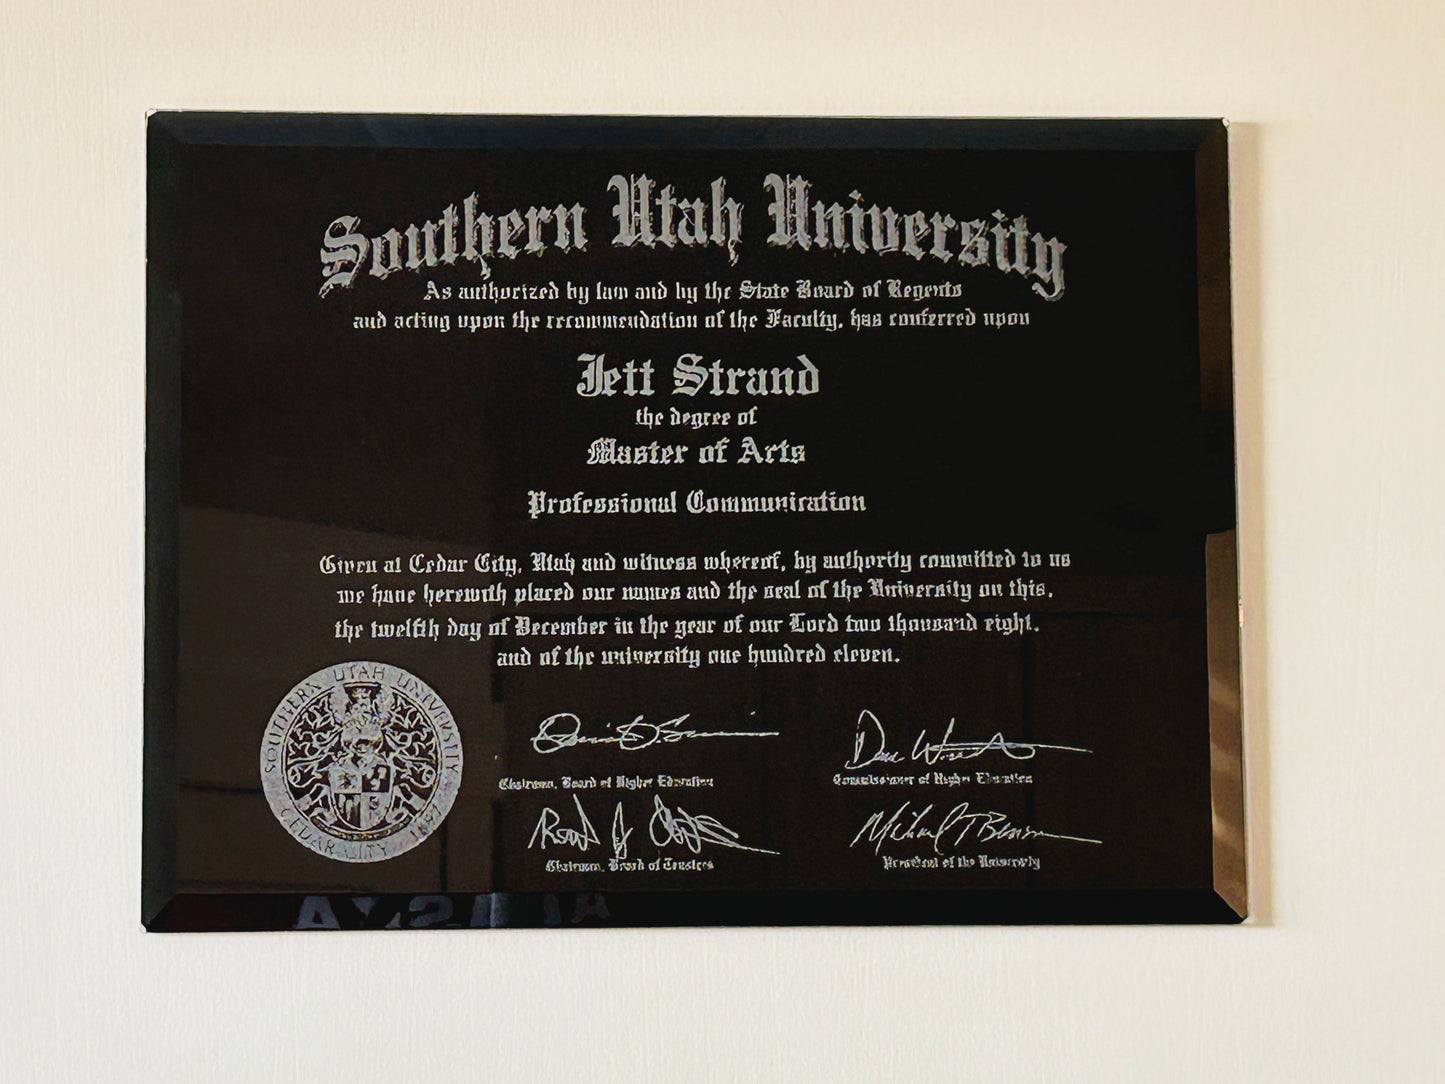 Black Glass Diploma Plaque, front view